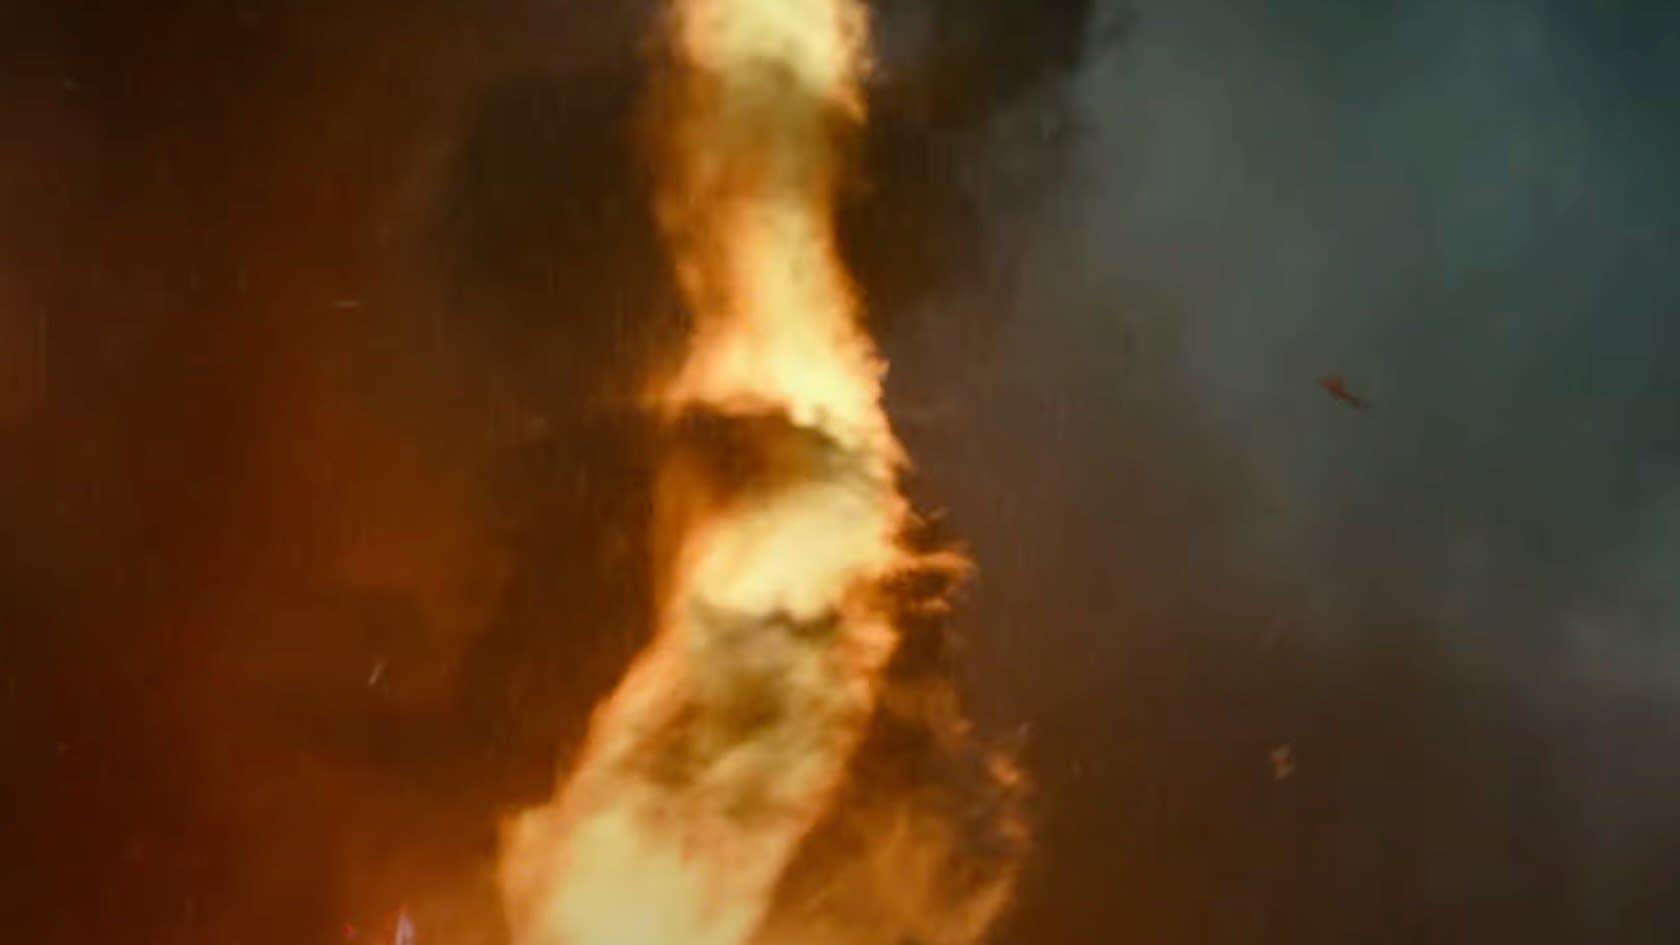 A Tornado Catches on Fire in the New Trailer for Twisters: Watch